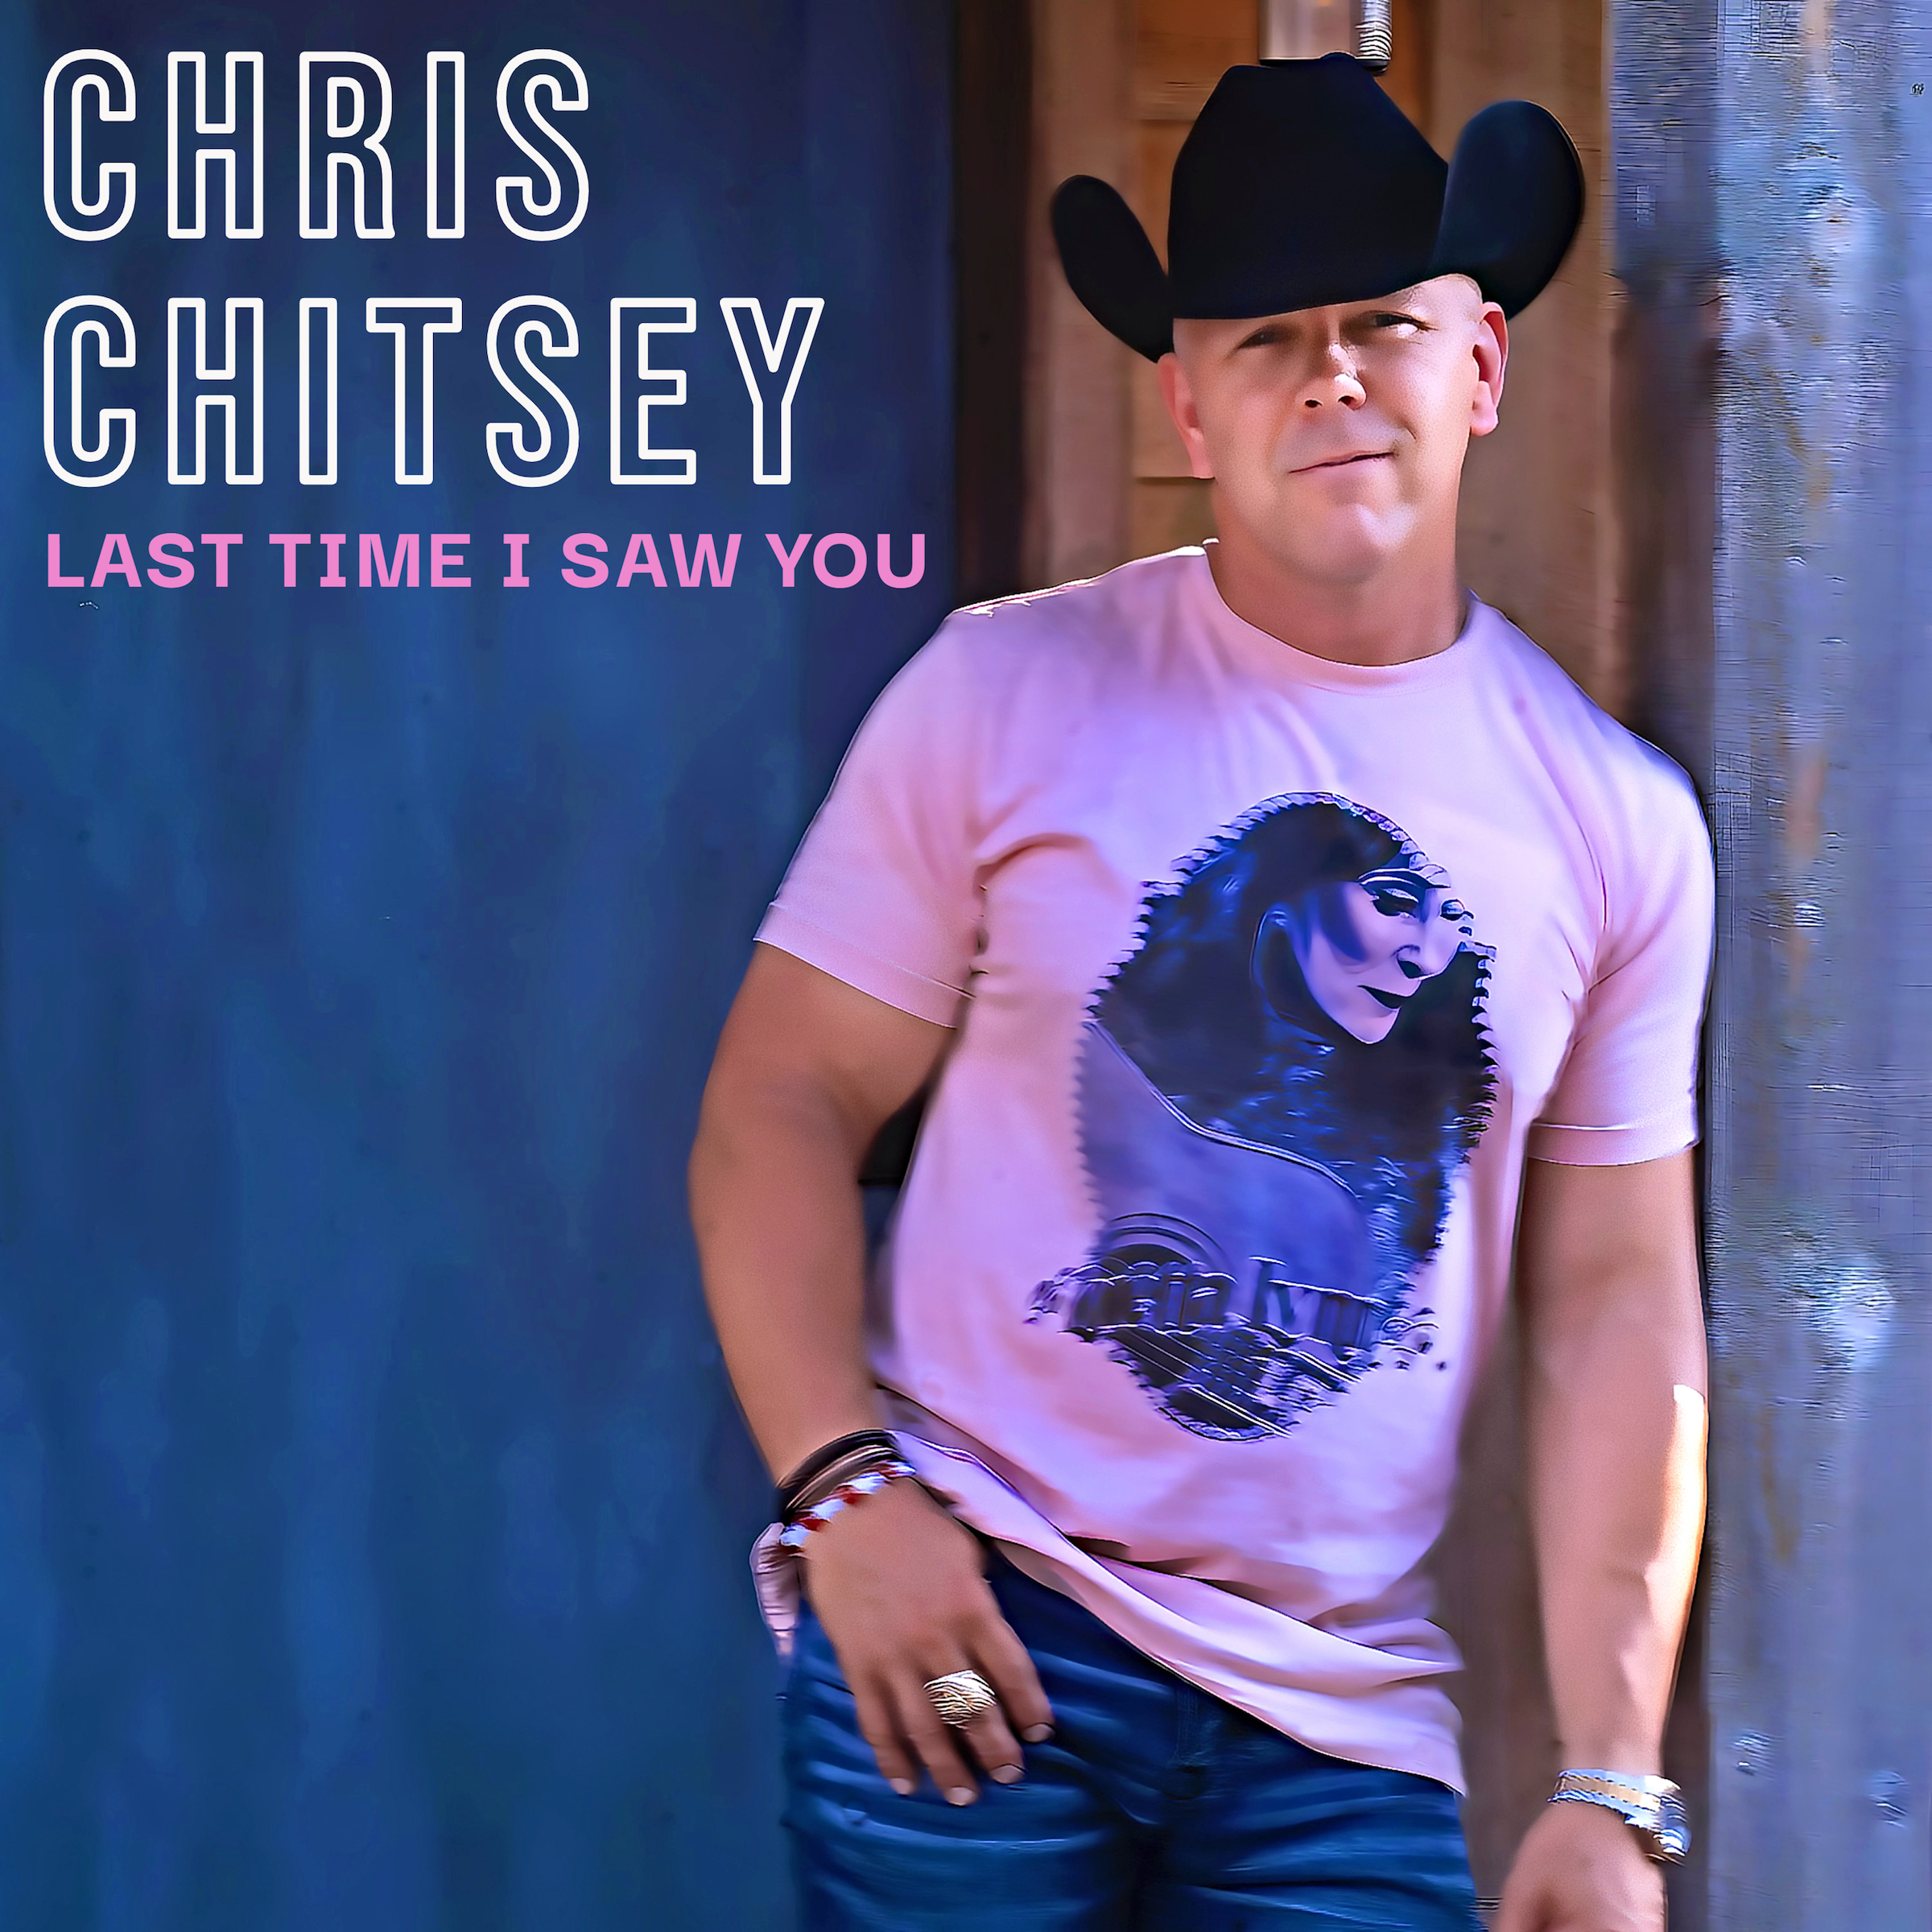 Chris Chitsey Climbs to Number One on Three Charts Worldwide